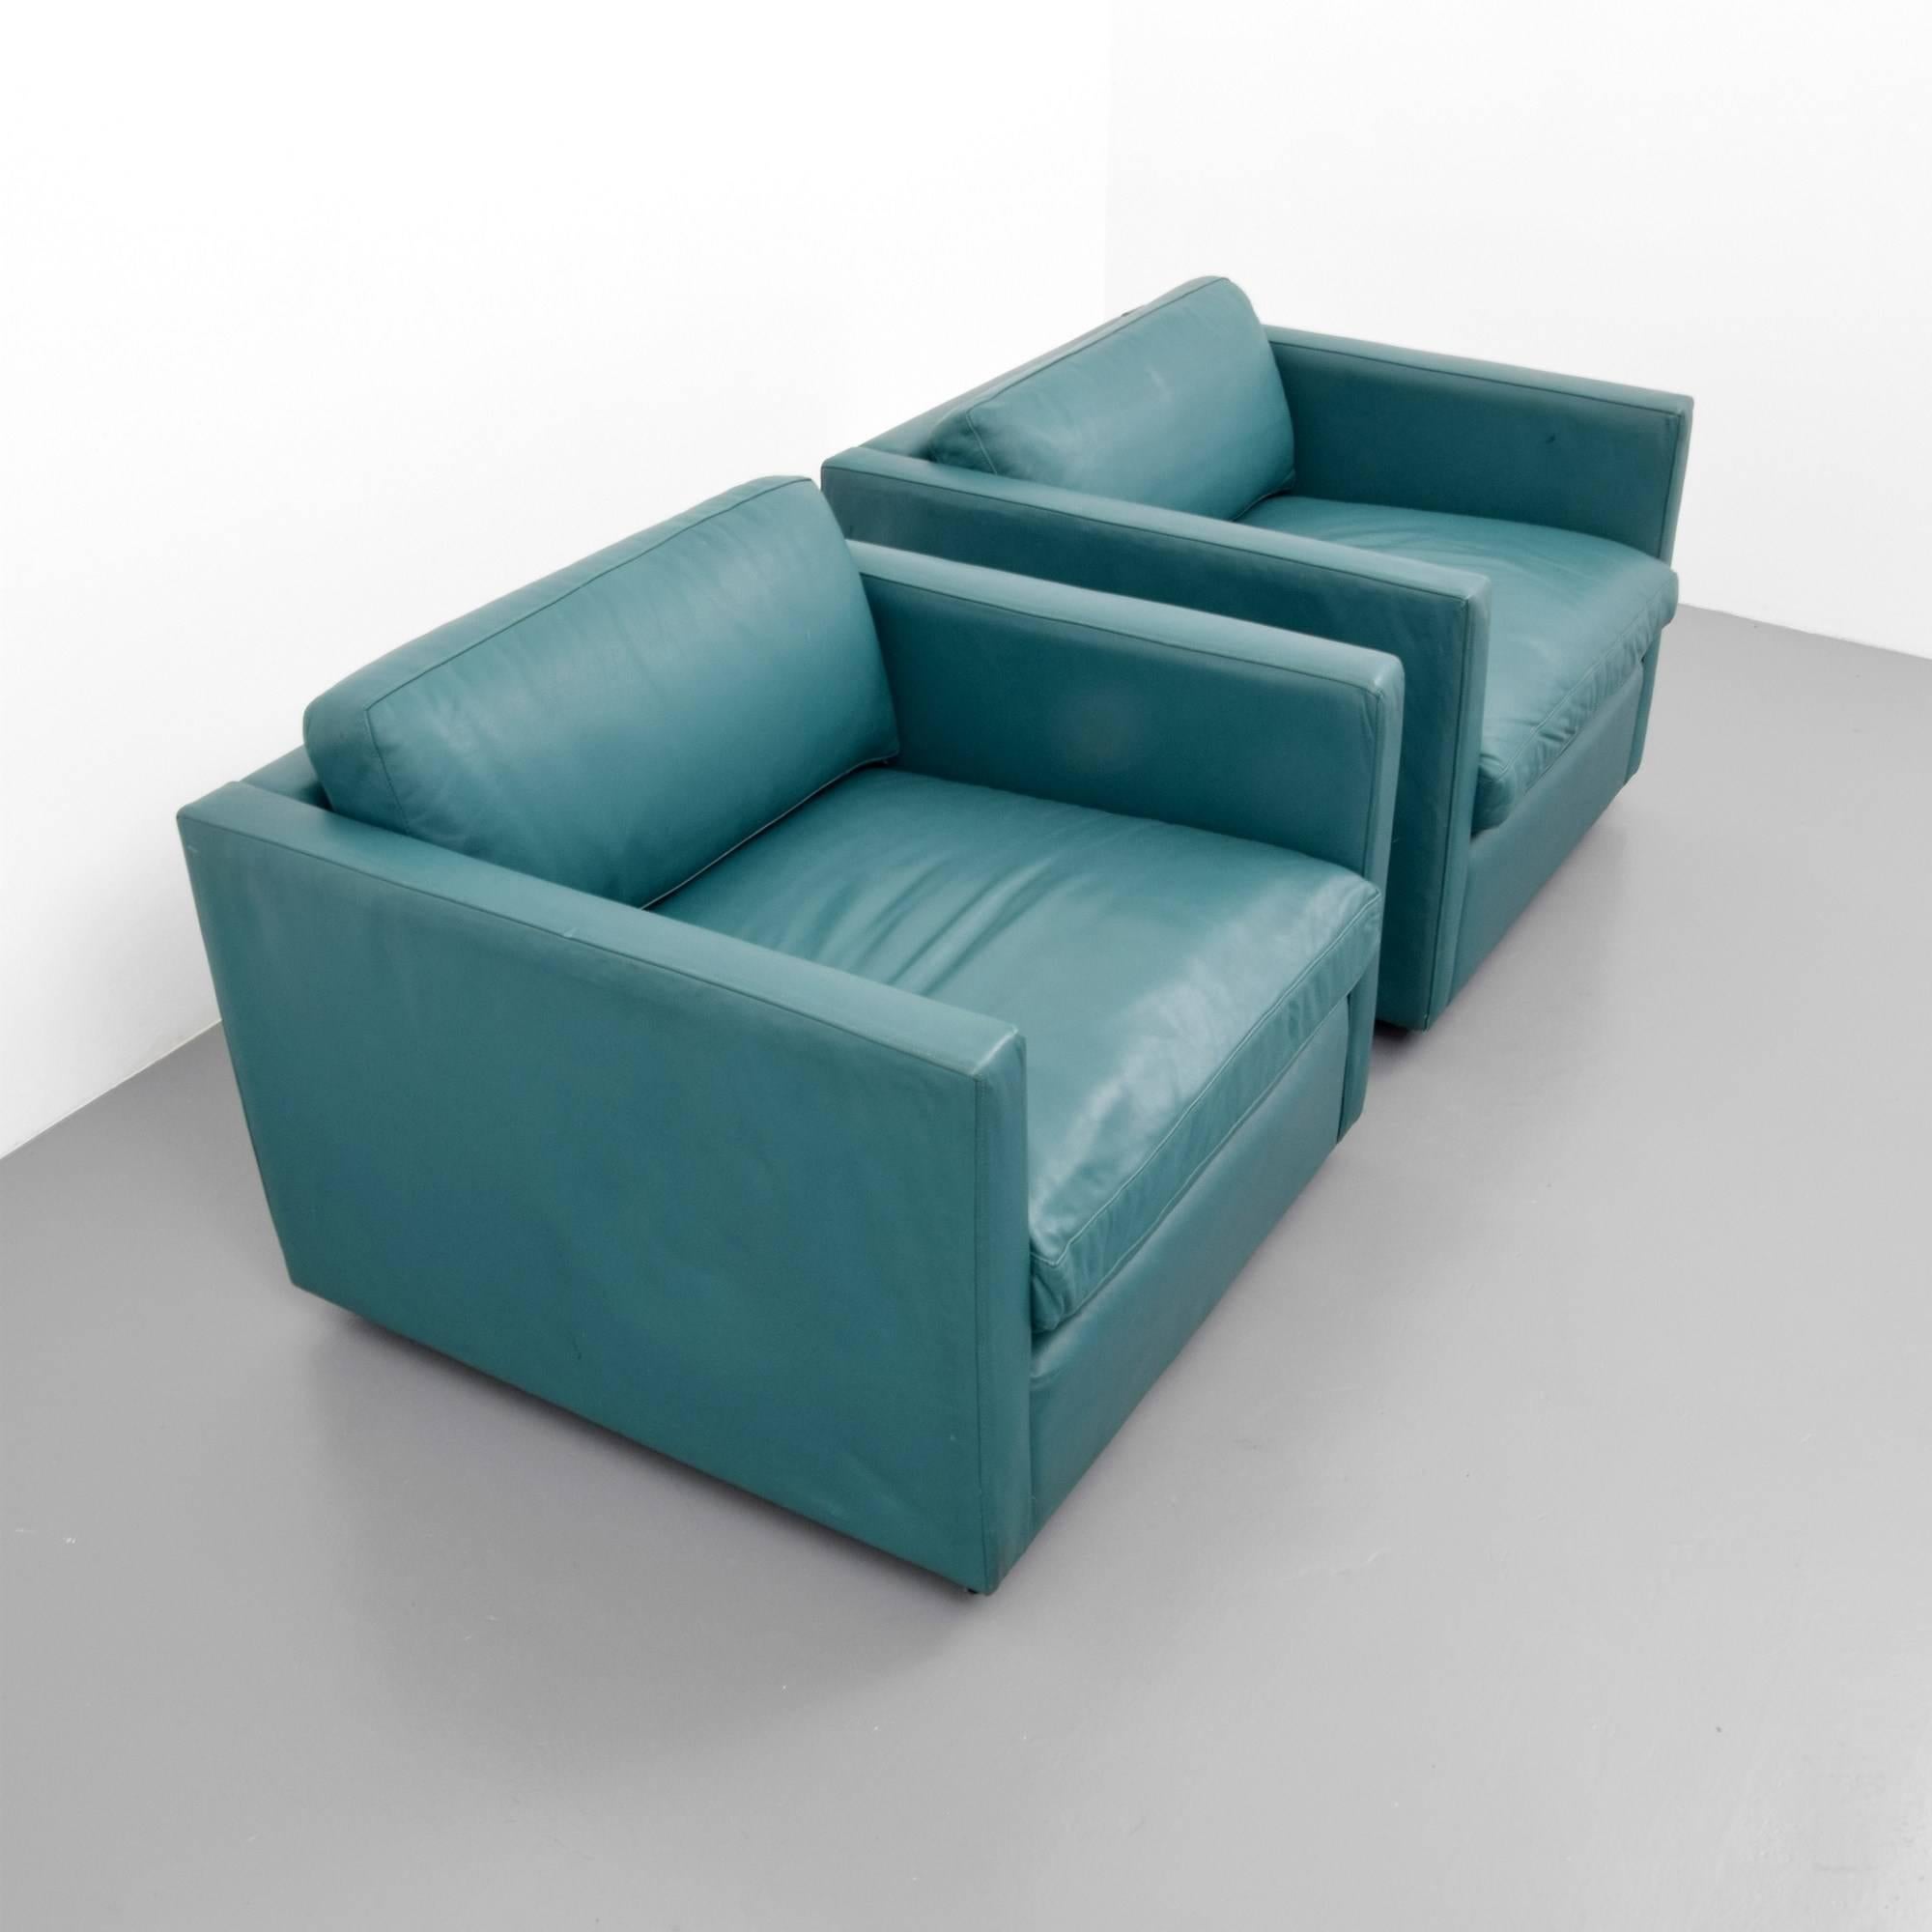 Charles Pfister lounge chairs for Knoll International.